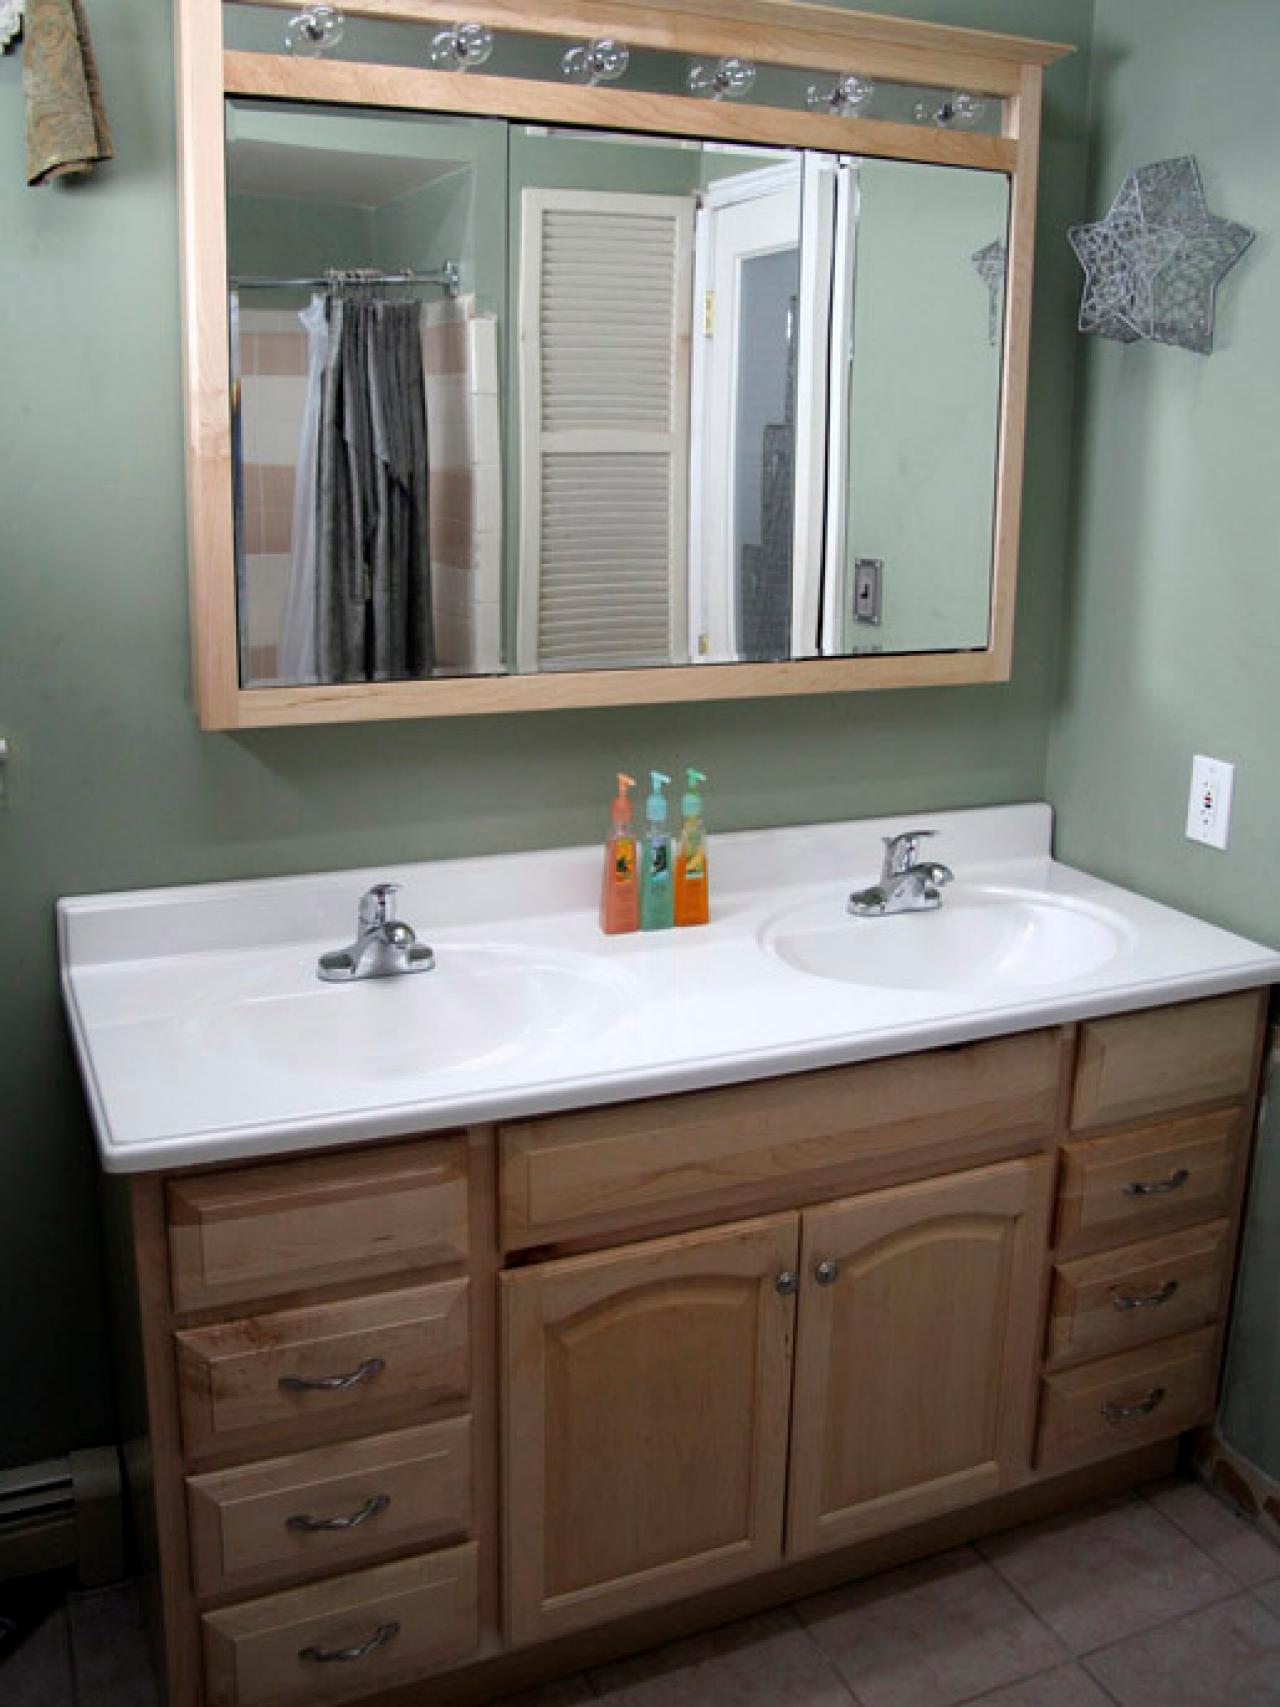 Installing A Bathroom Vanity, How Much Does It Cost To Remove And Replace A Bathroom Vanity